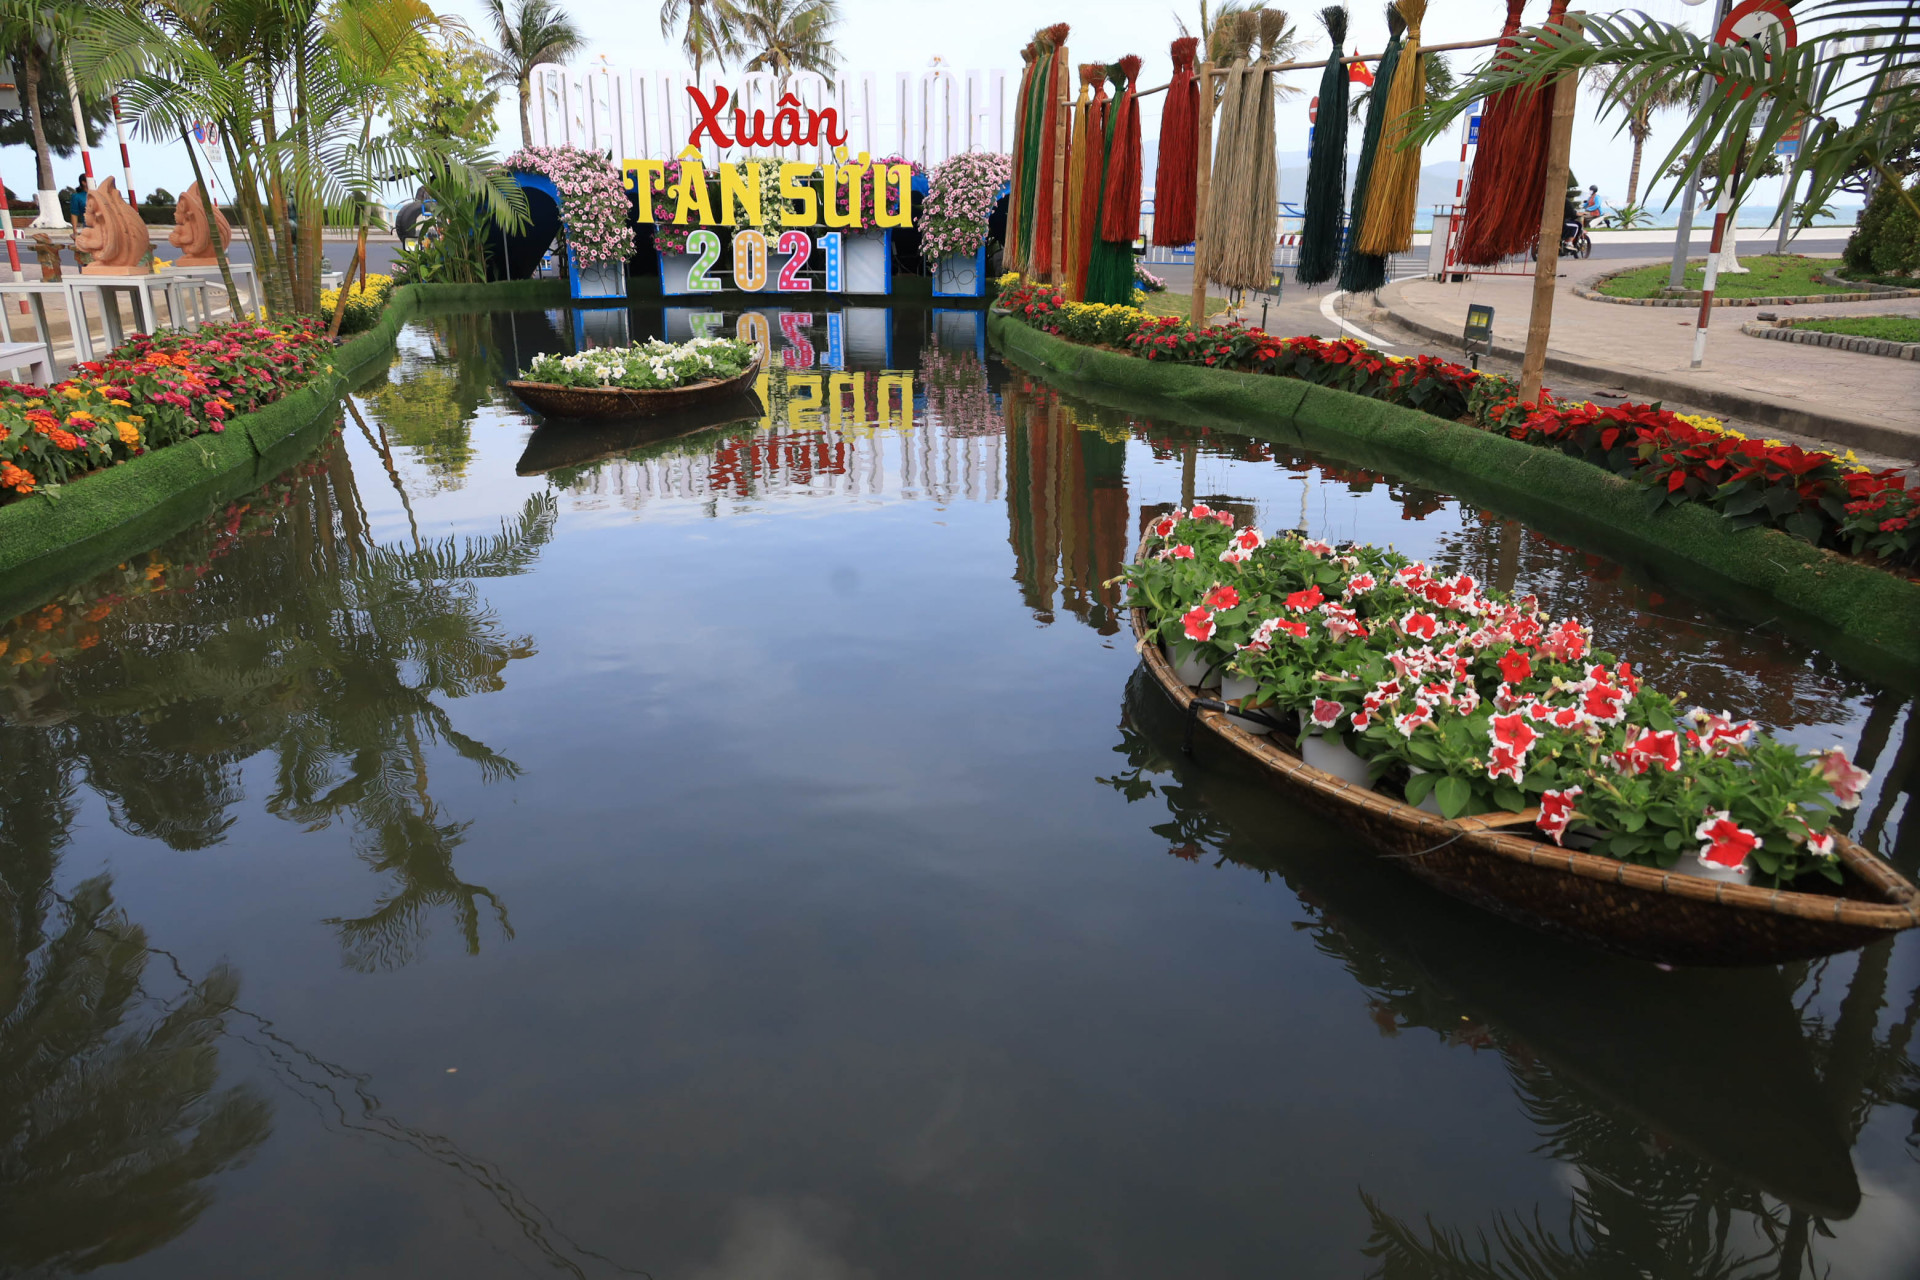 Themed decoration portraying Cai River